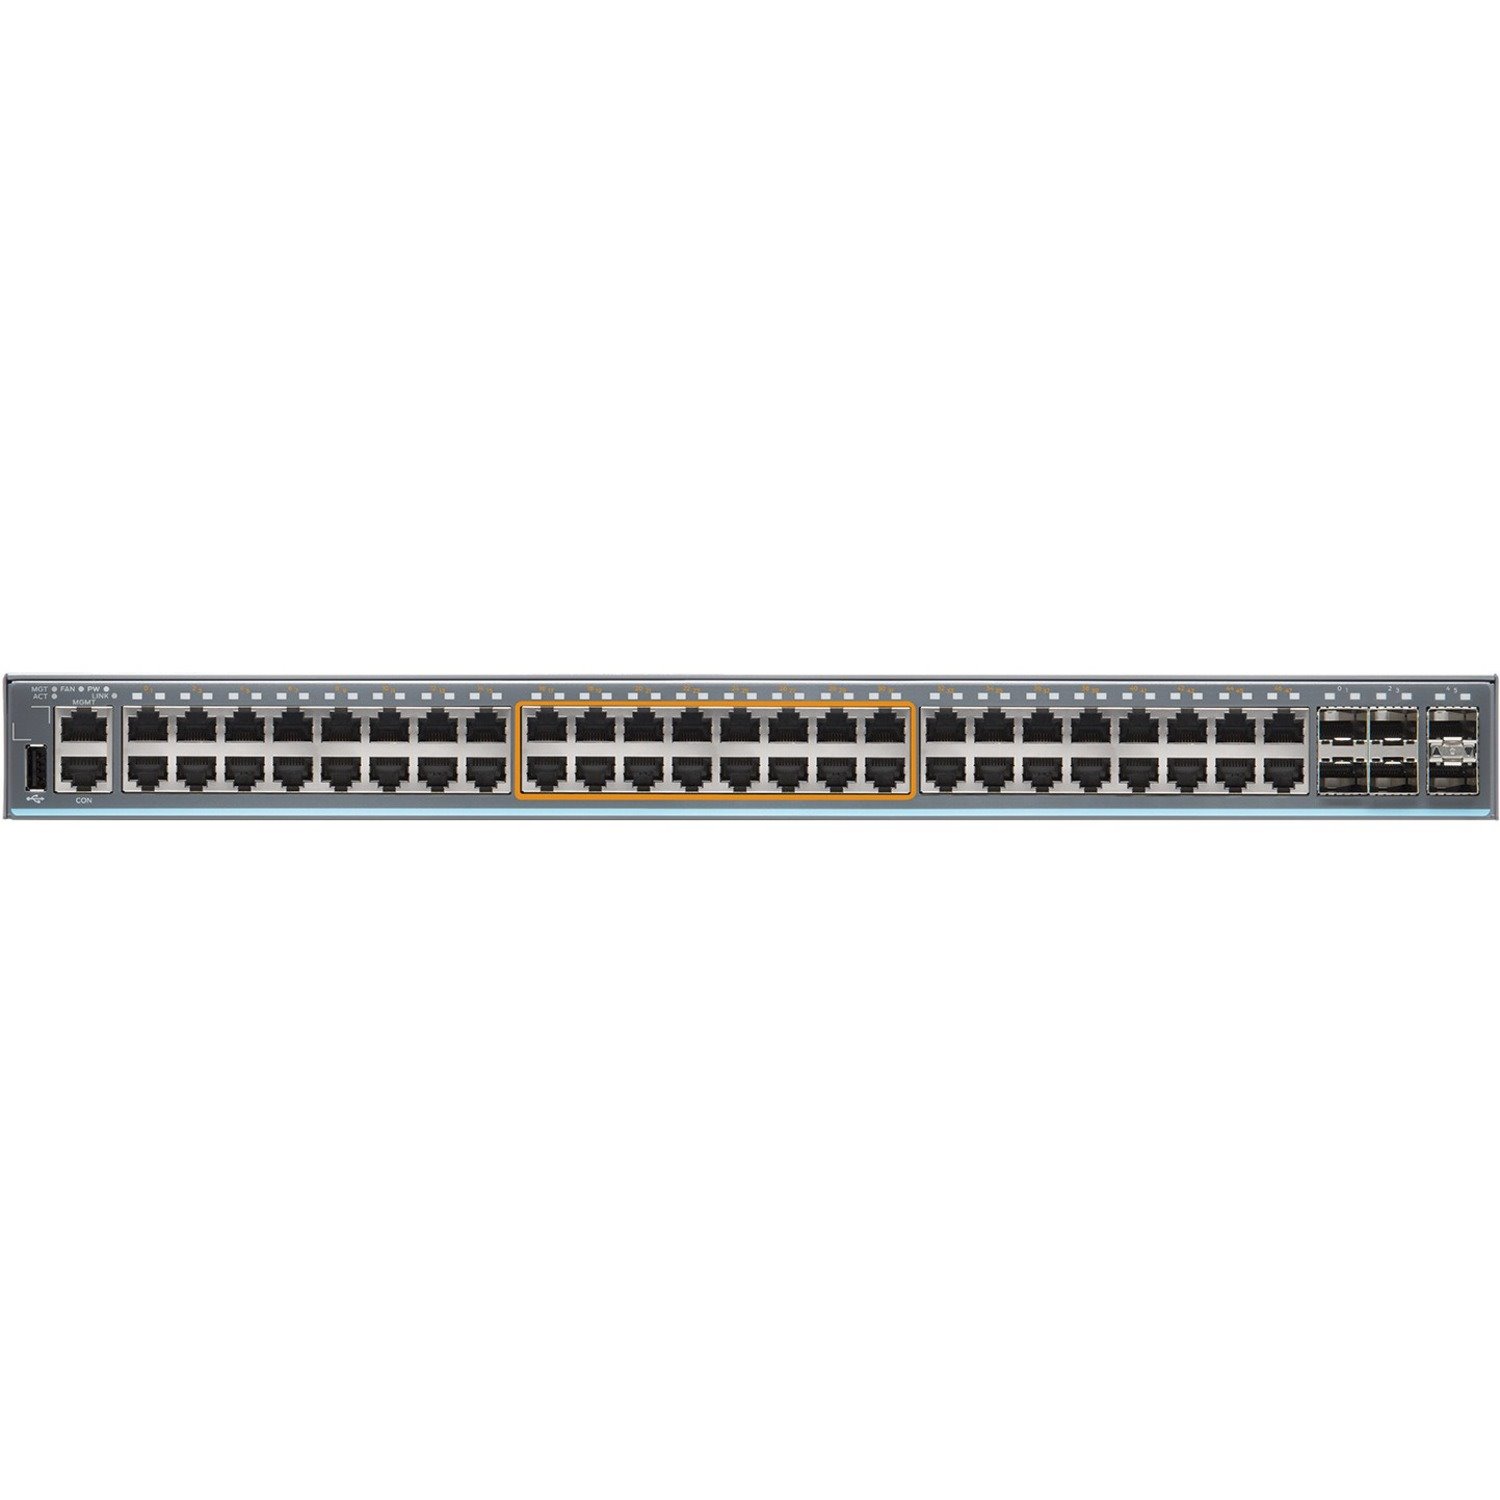 Juniper EX2300 EX2300-48MP 48 Ports Manageable Ethernet Switch - Gigabit Ethernet, 2.5 Gigabit Ethernet, 10 Gigabit Ethernet - 10/100/1000Base-T, 2.5GBase-T, 10GBase-X - TAA Compliant